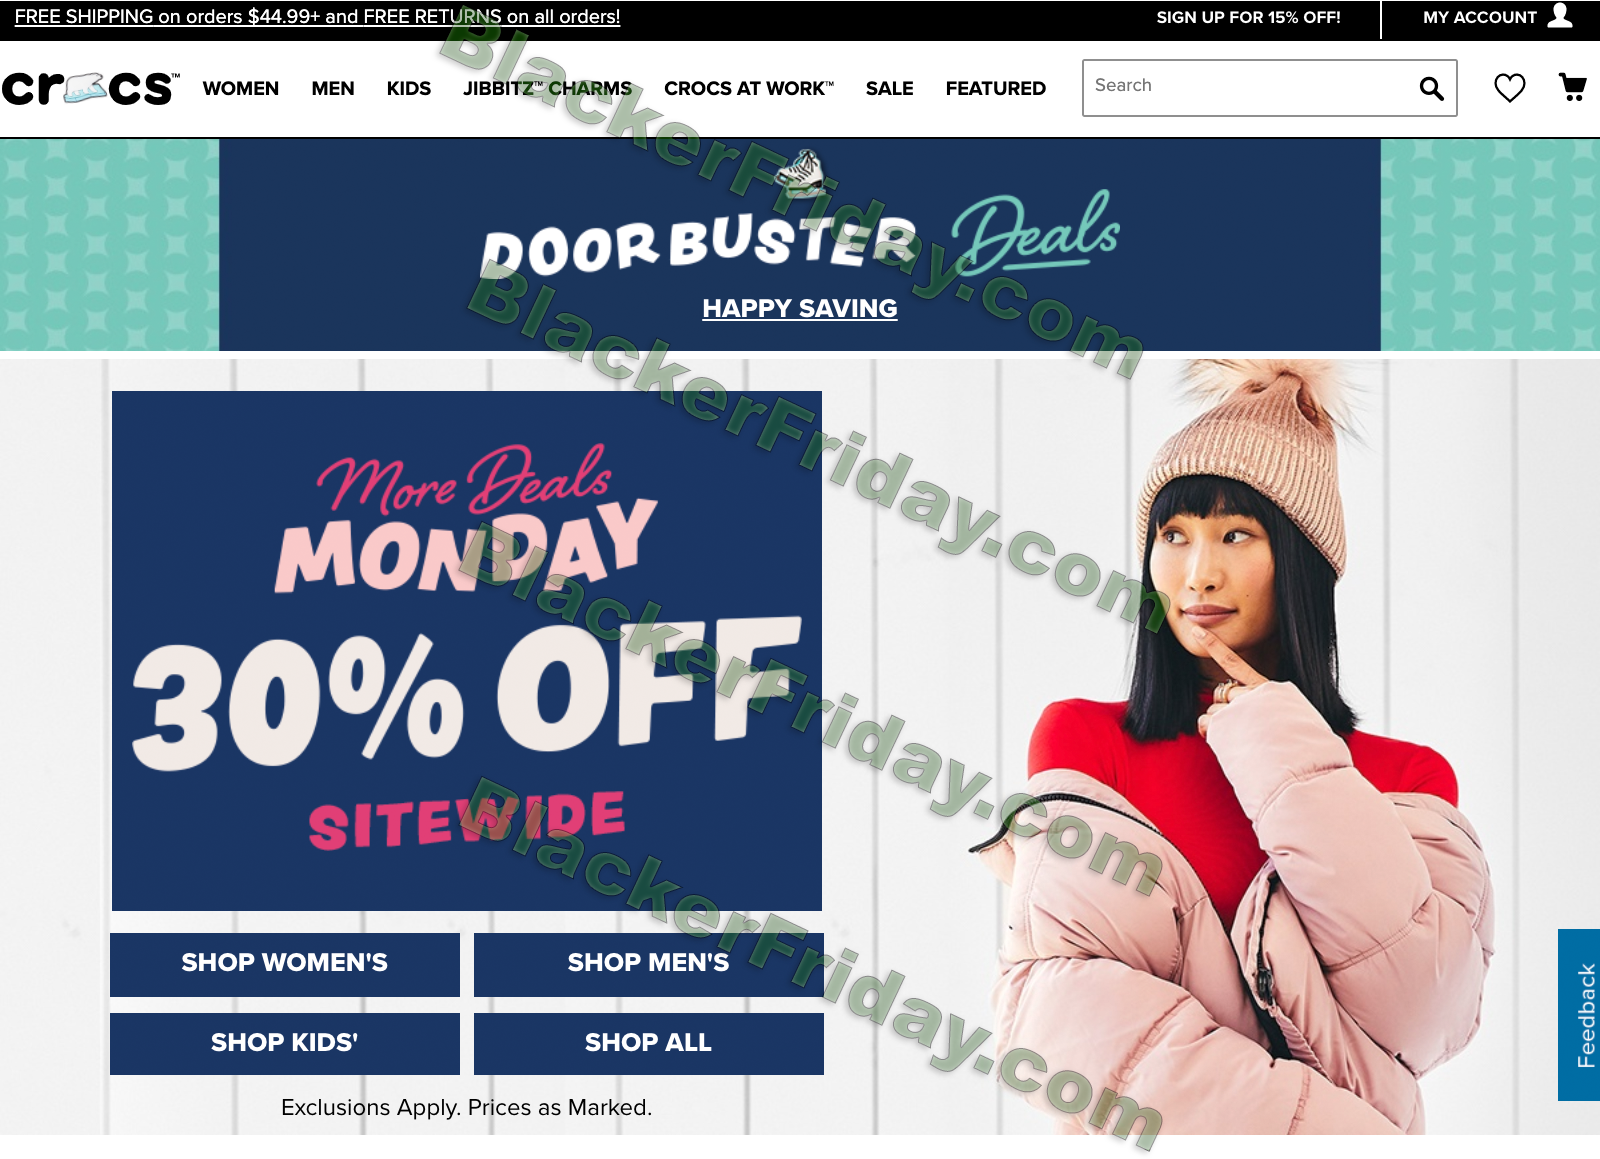 Crocs Cyber Monday 2021 Sale - What to 